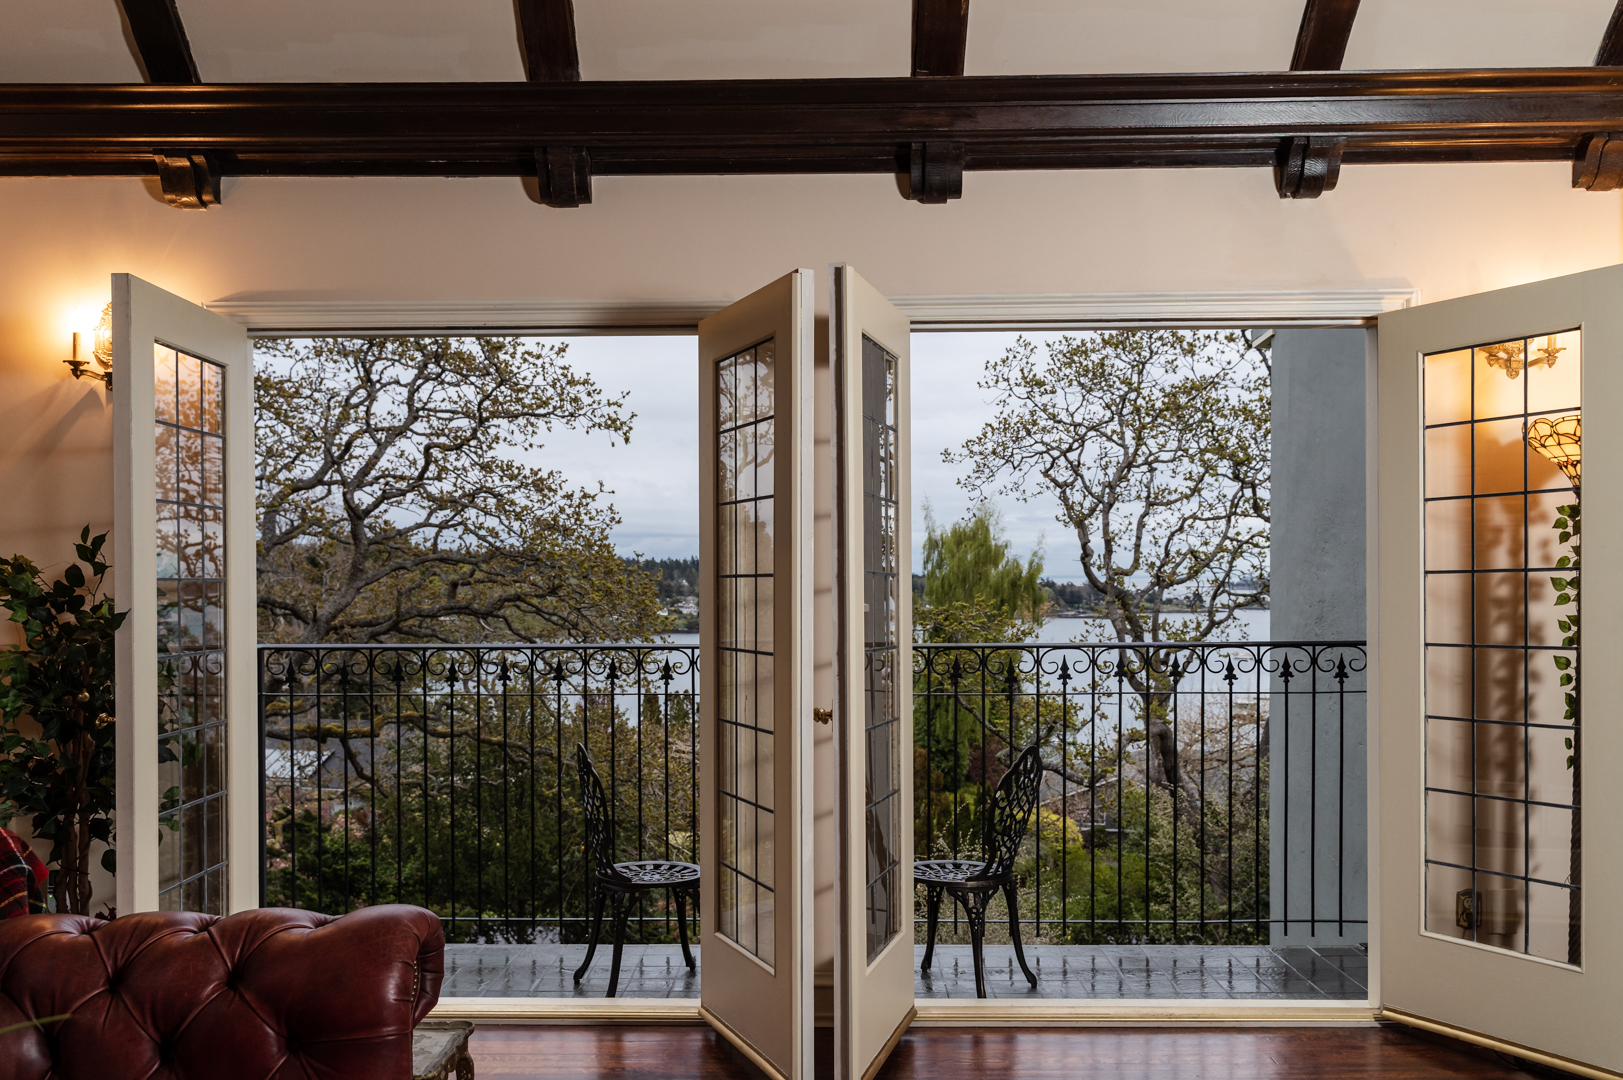 Two sets of double glass paned doors open onto balcony with wrought iron railing